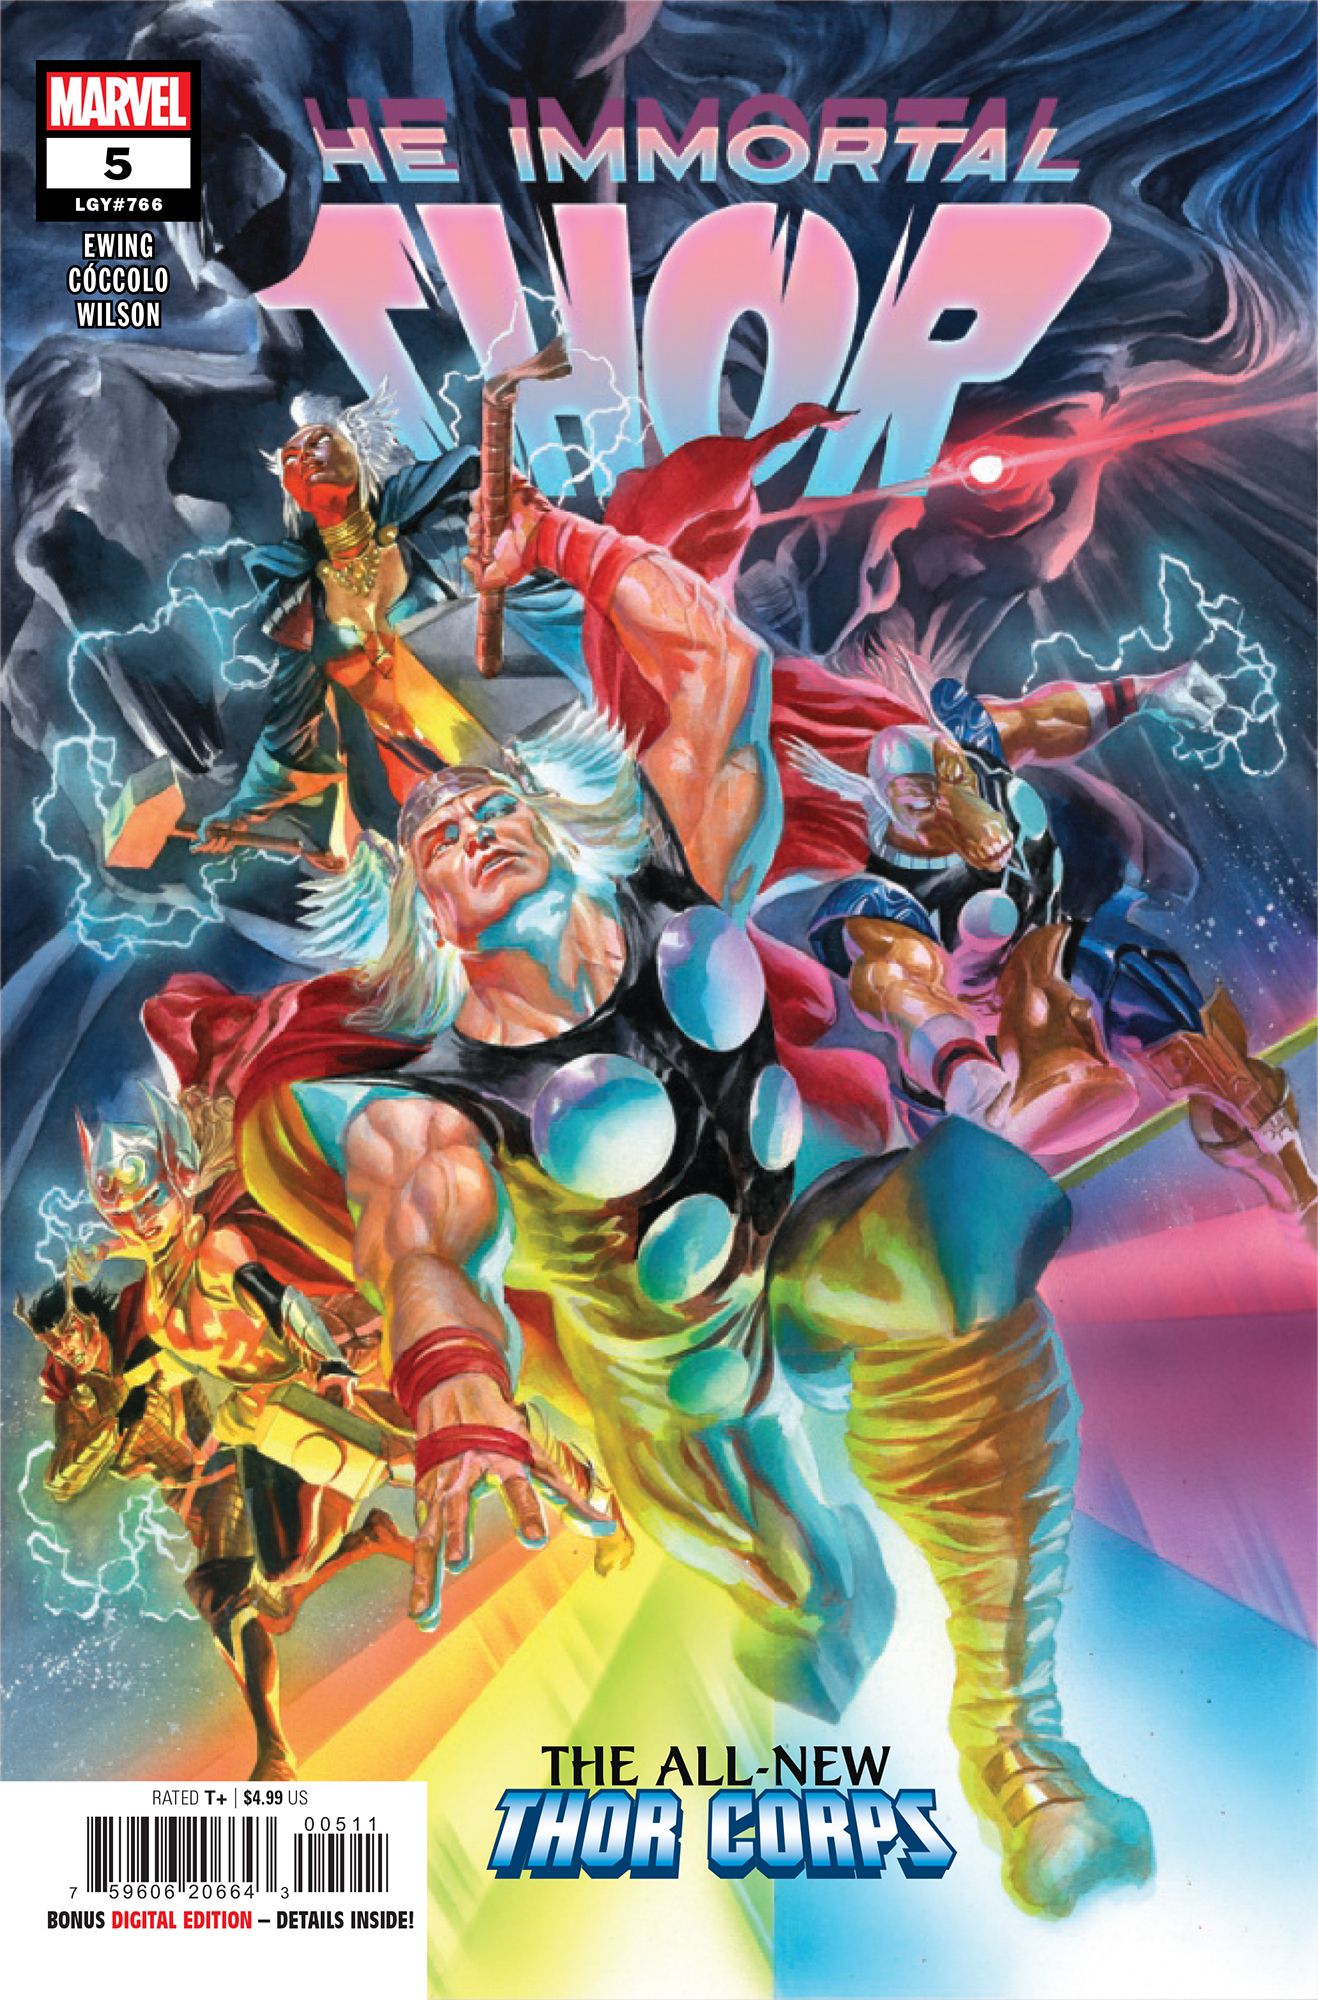 Immortal Thor #5 cover. Loki, Jane Foster, Storm, Beta-Ray Bill, and Thor cross the Bifrost towards the reader, each wielding their own Mjolnir.